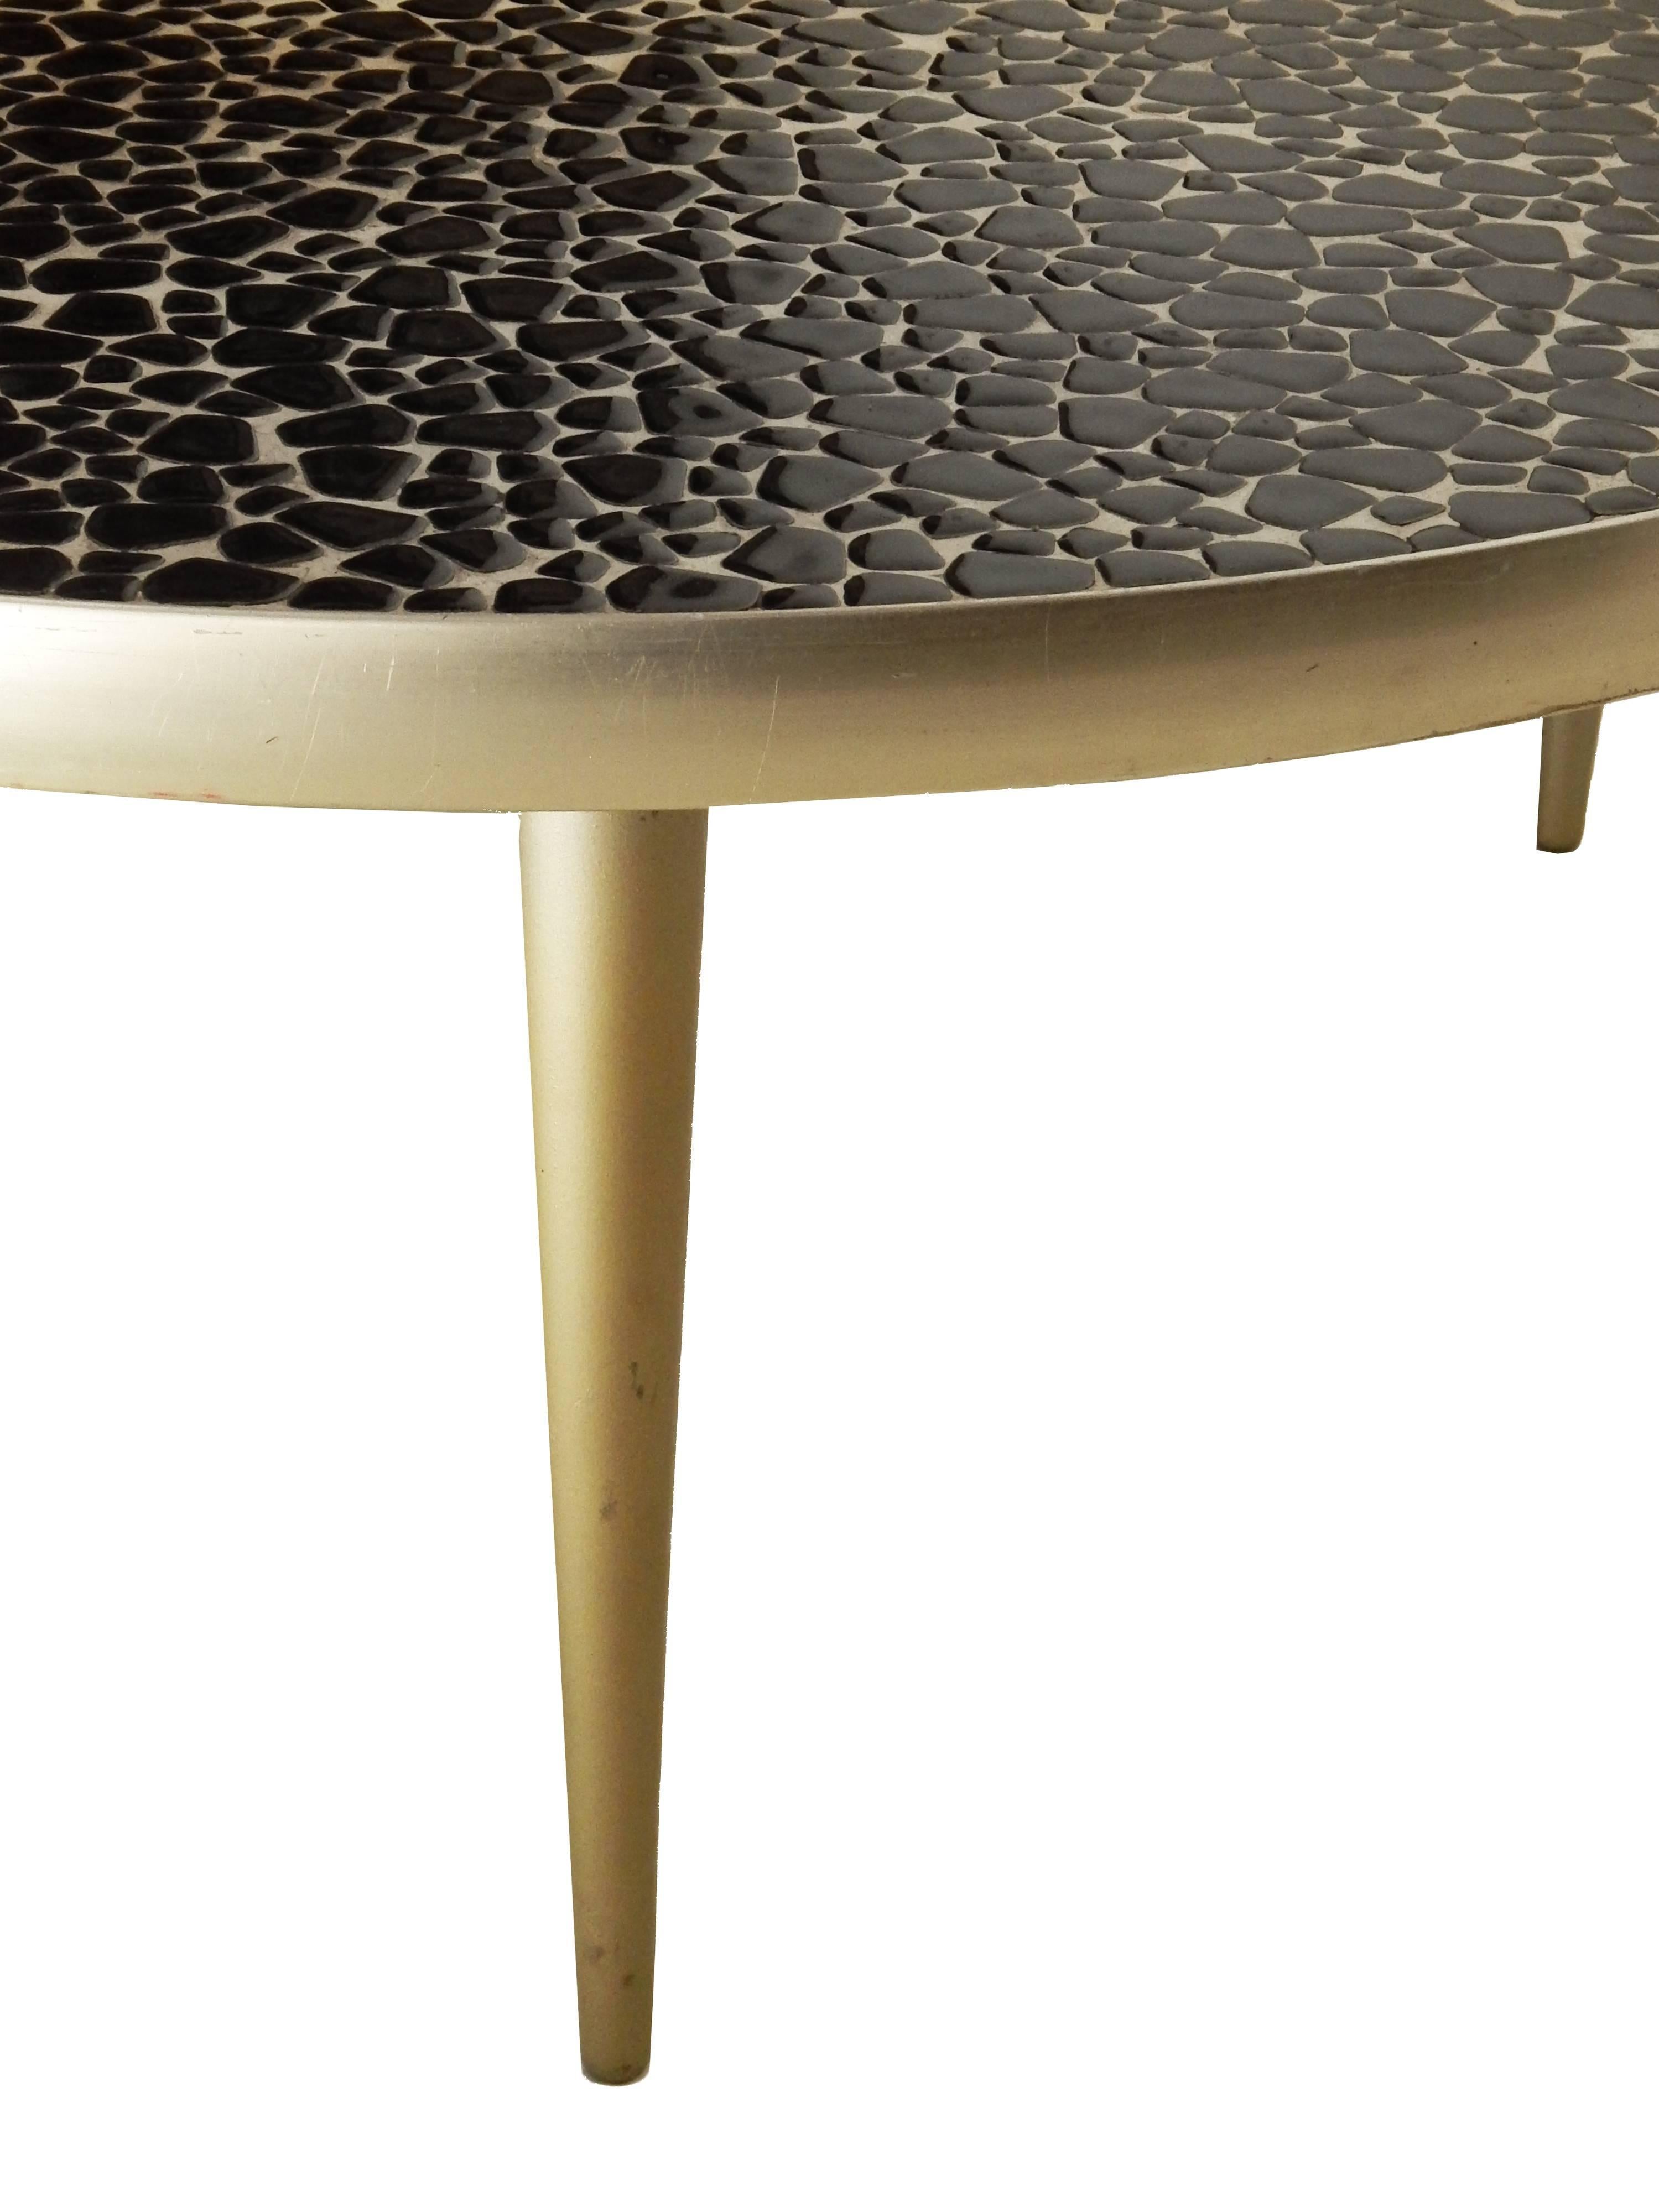 20th Century Mid-Century Mosaic Tile Coffee Table For Sale